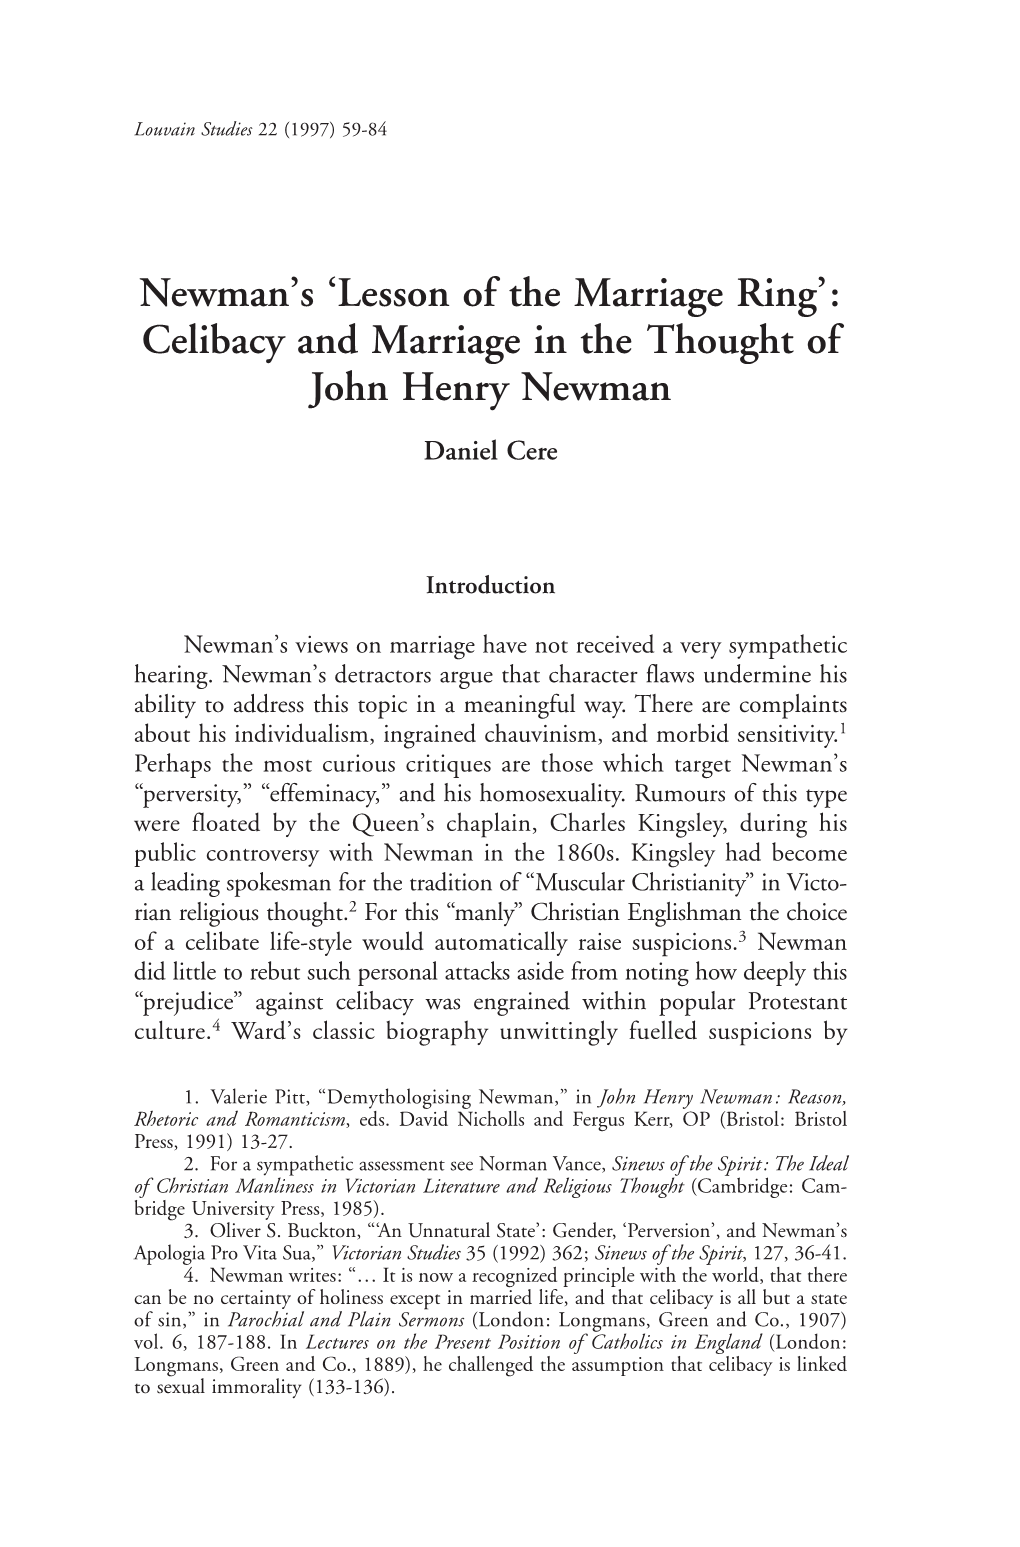 Newman's 'Lesson of the Marriage Ring': Celibacy and Marriage in The